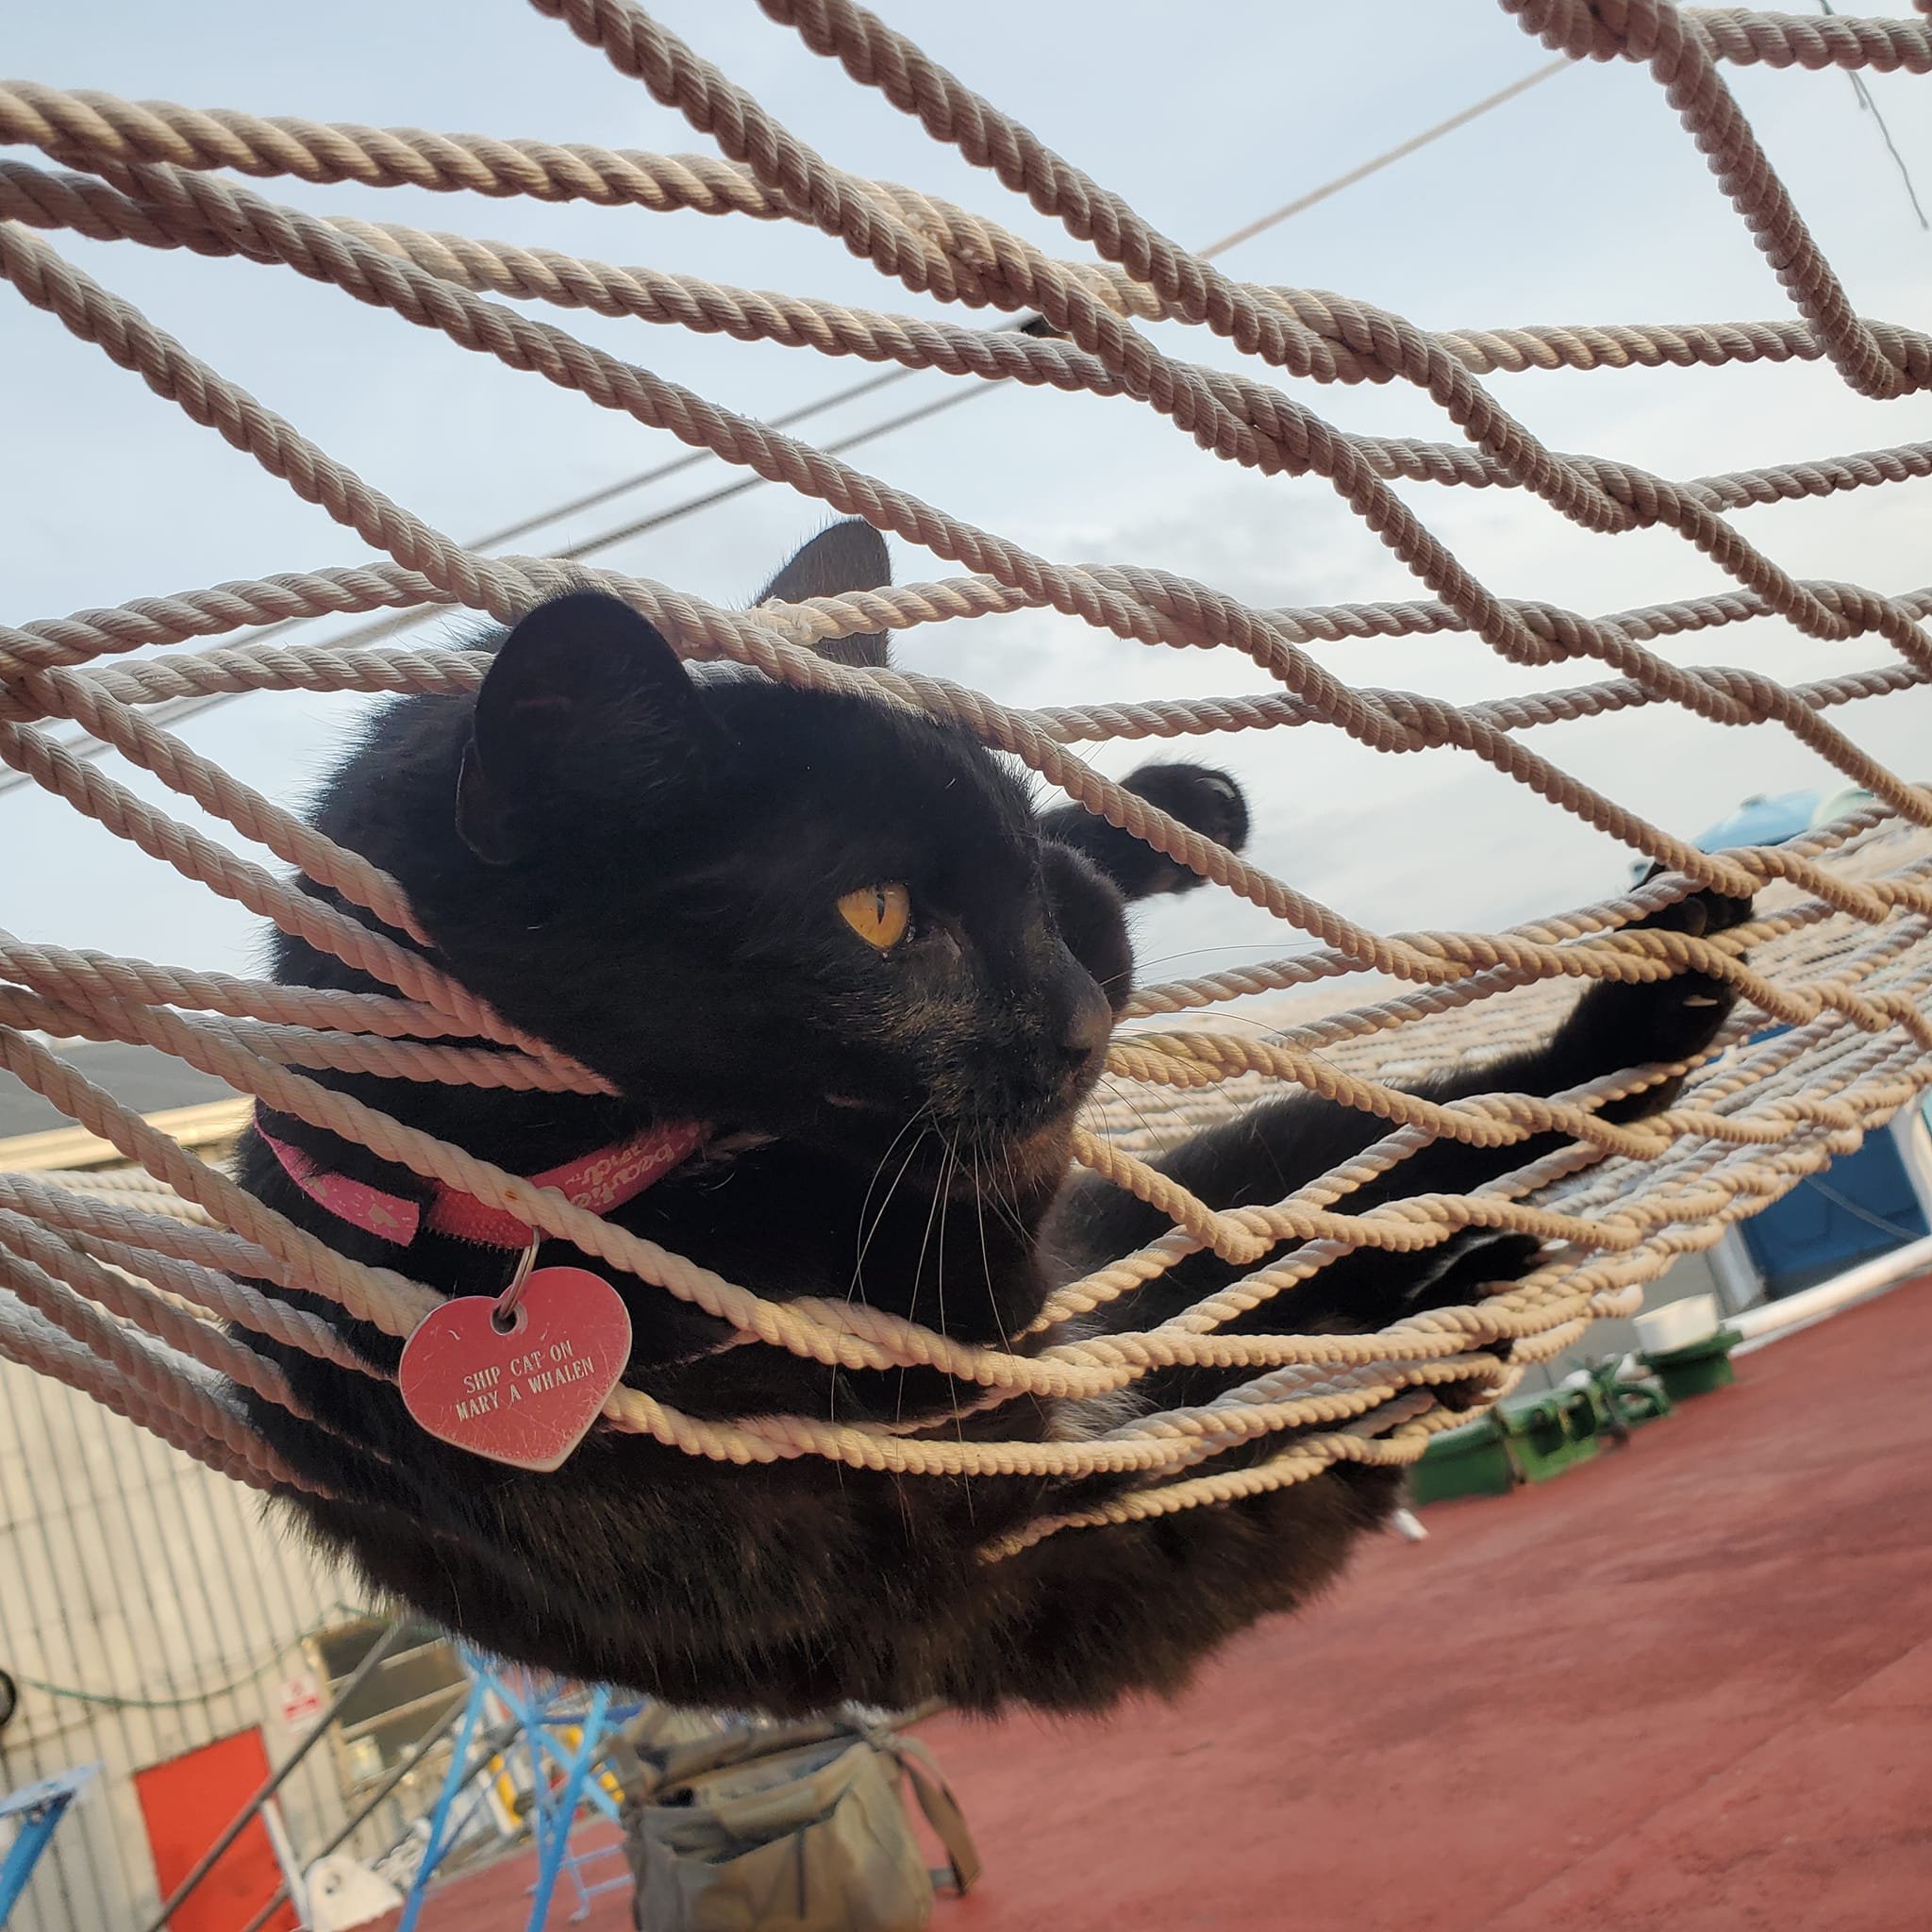 Ship cat Chiclet would like you to know that the #MaryWhalen is transitioning to summer mode! 🌞 with more  #TankerTime amenities: 

One hammock set up. Tankerman's cabin (kids books n playspace) is now open for use during TankerTime hours: Mon-Fri, 